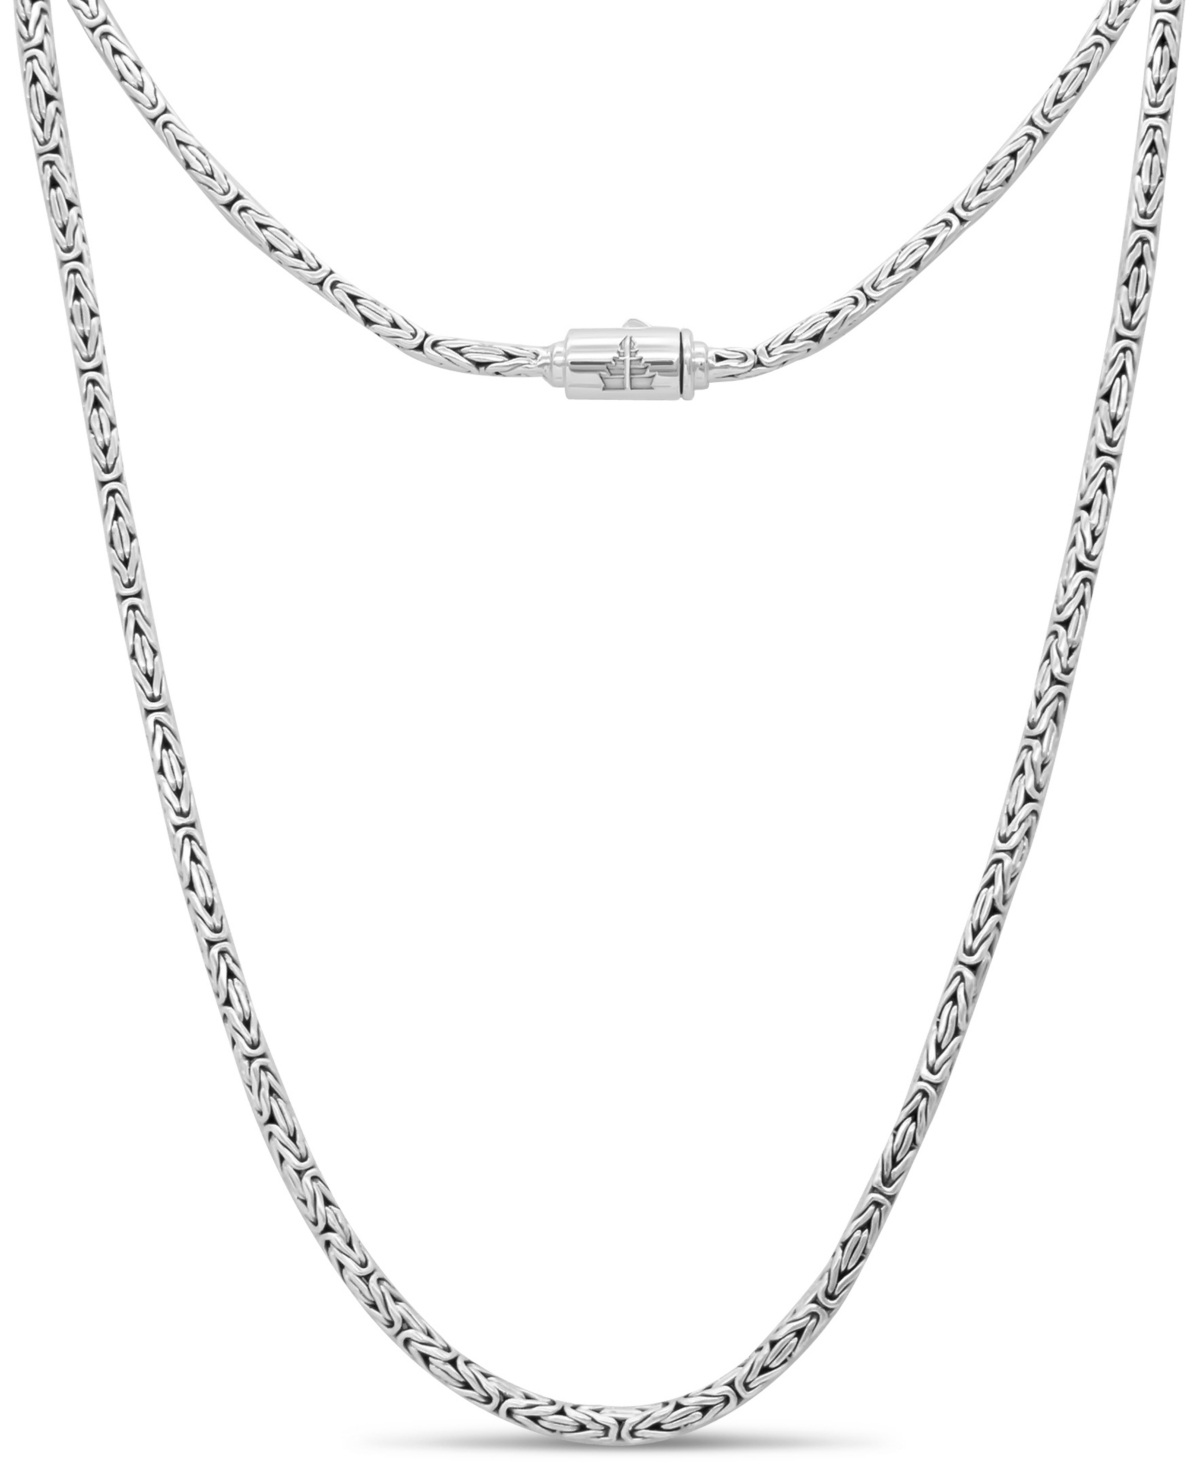 Borobudur Round 2.5mm Chain Necklace in Sterling Silver - Silver